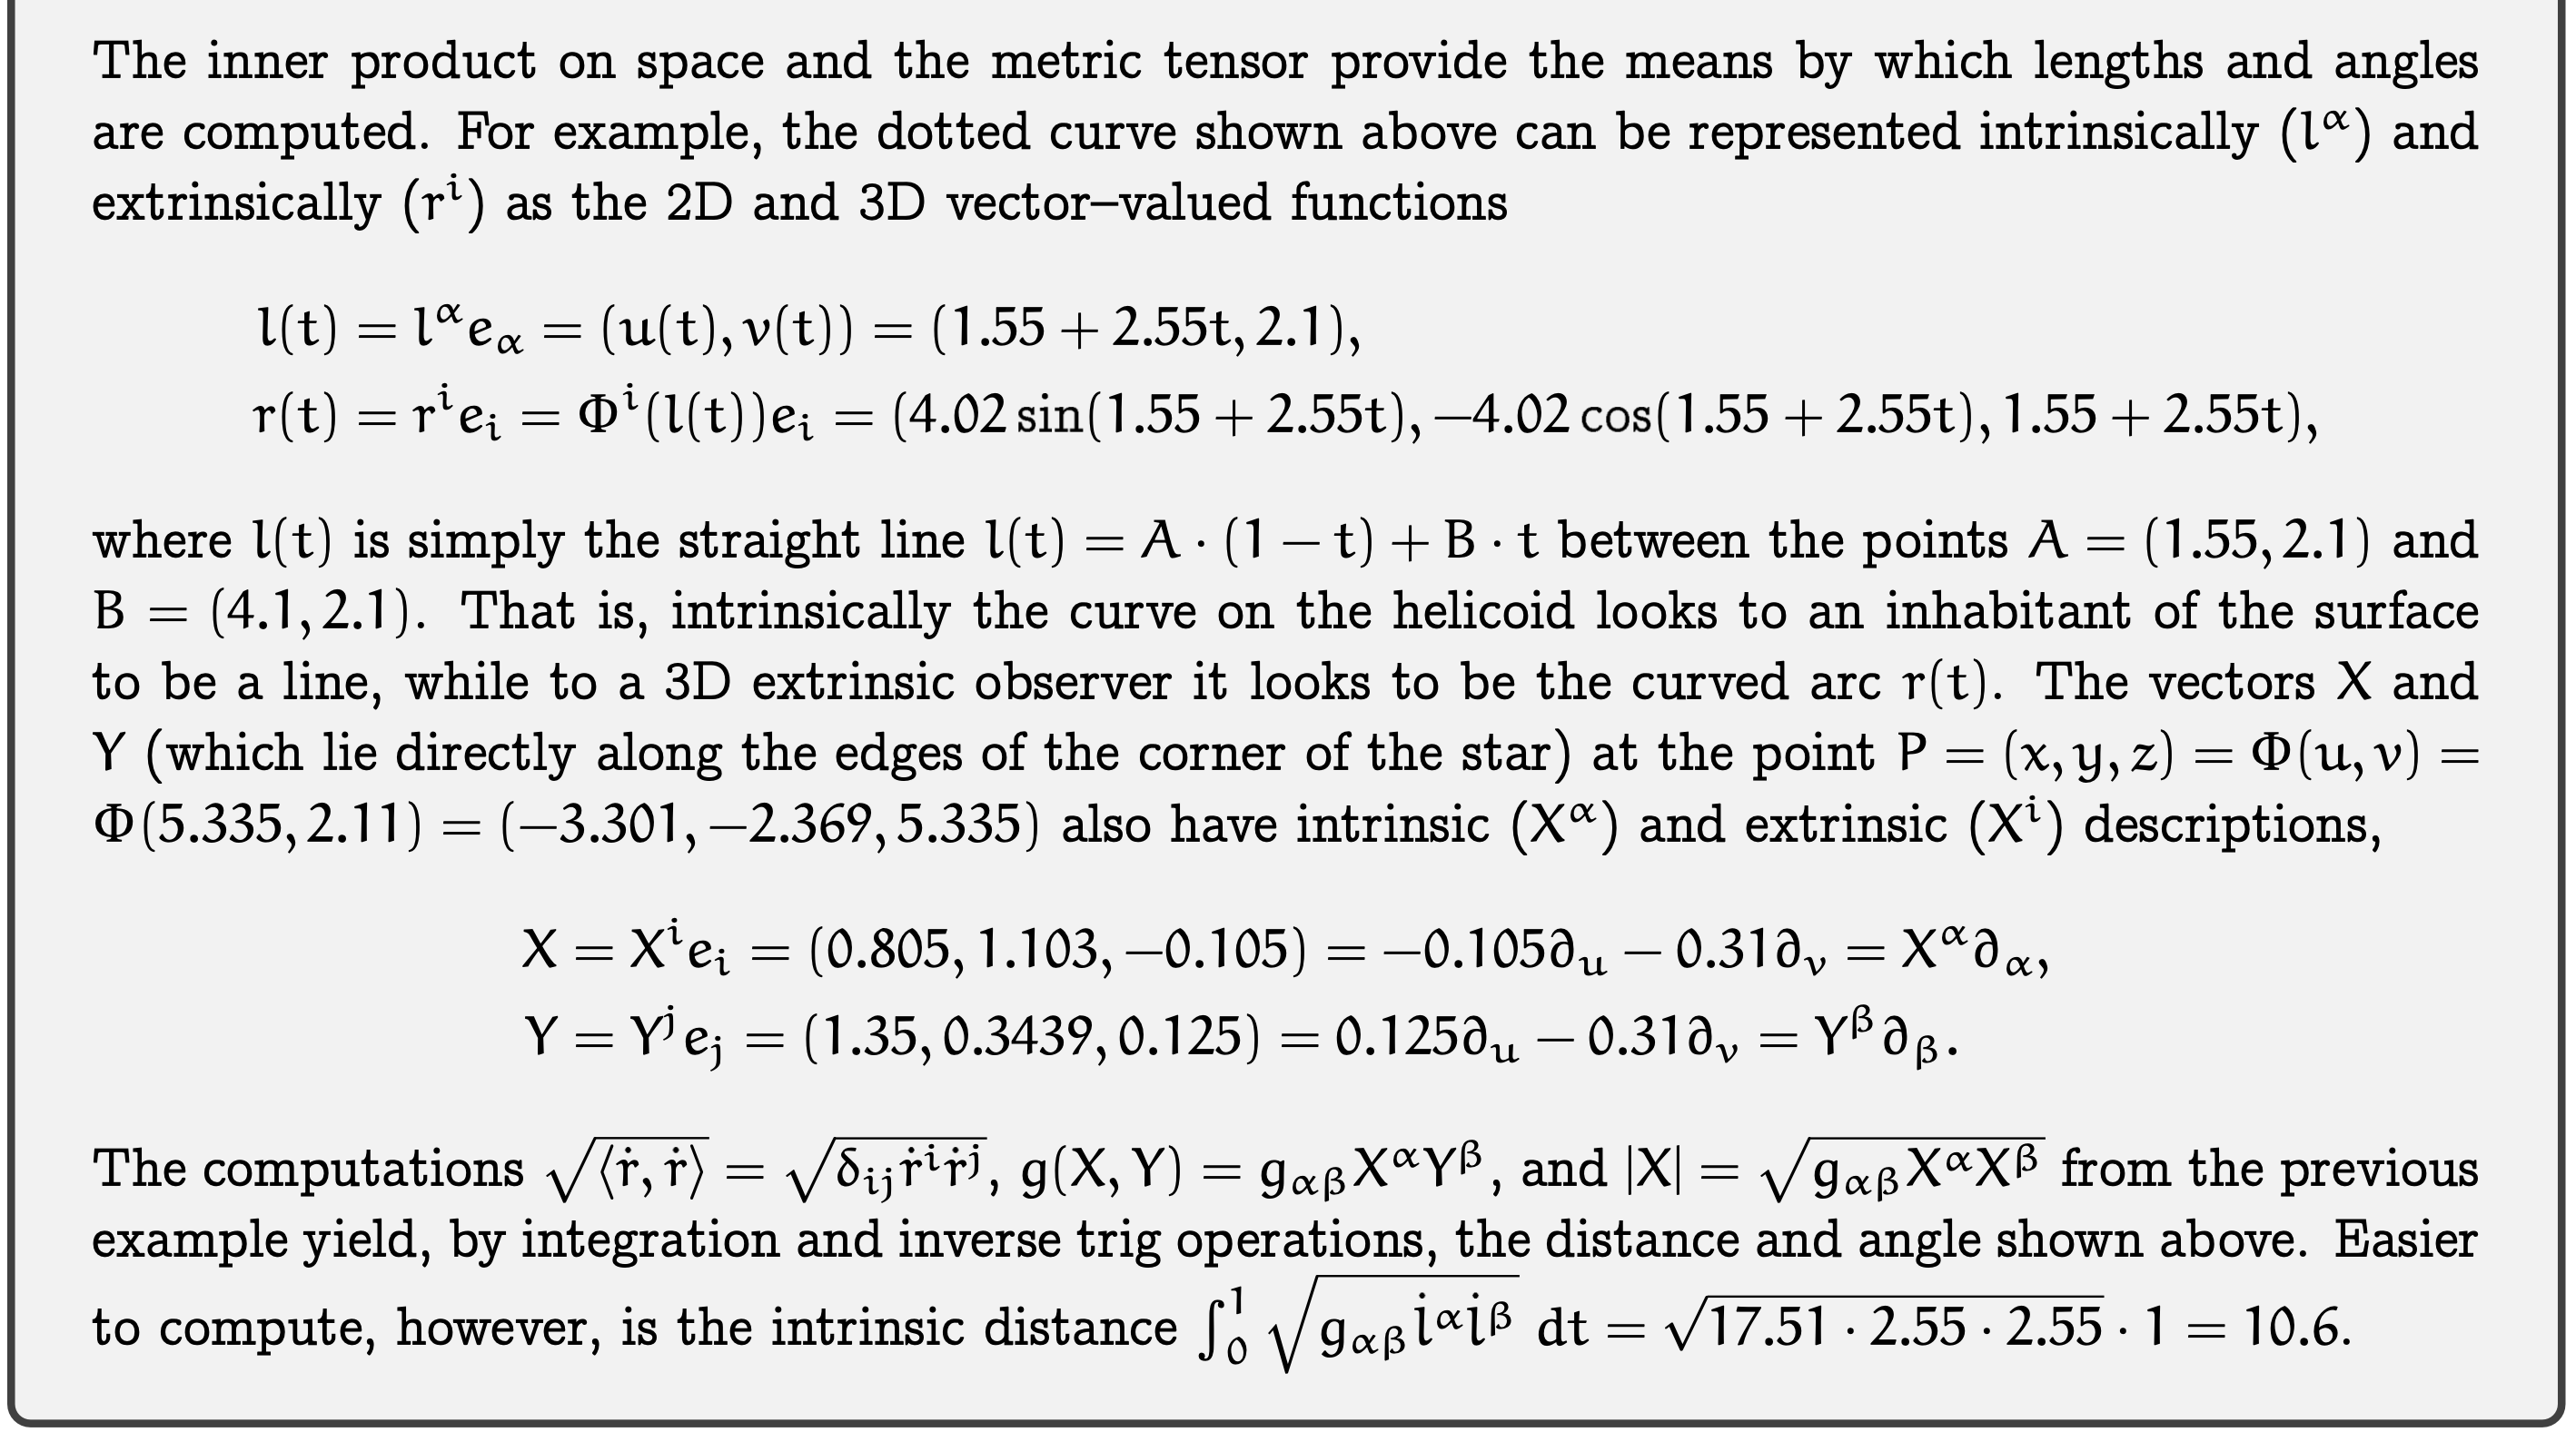 Screenshots of Intrinsic Computations with the Metric Tensor. Details to follow in the additional resources (Apple Book, YouTube Video, etc.) to this post.